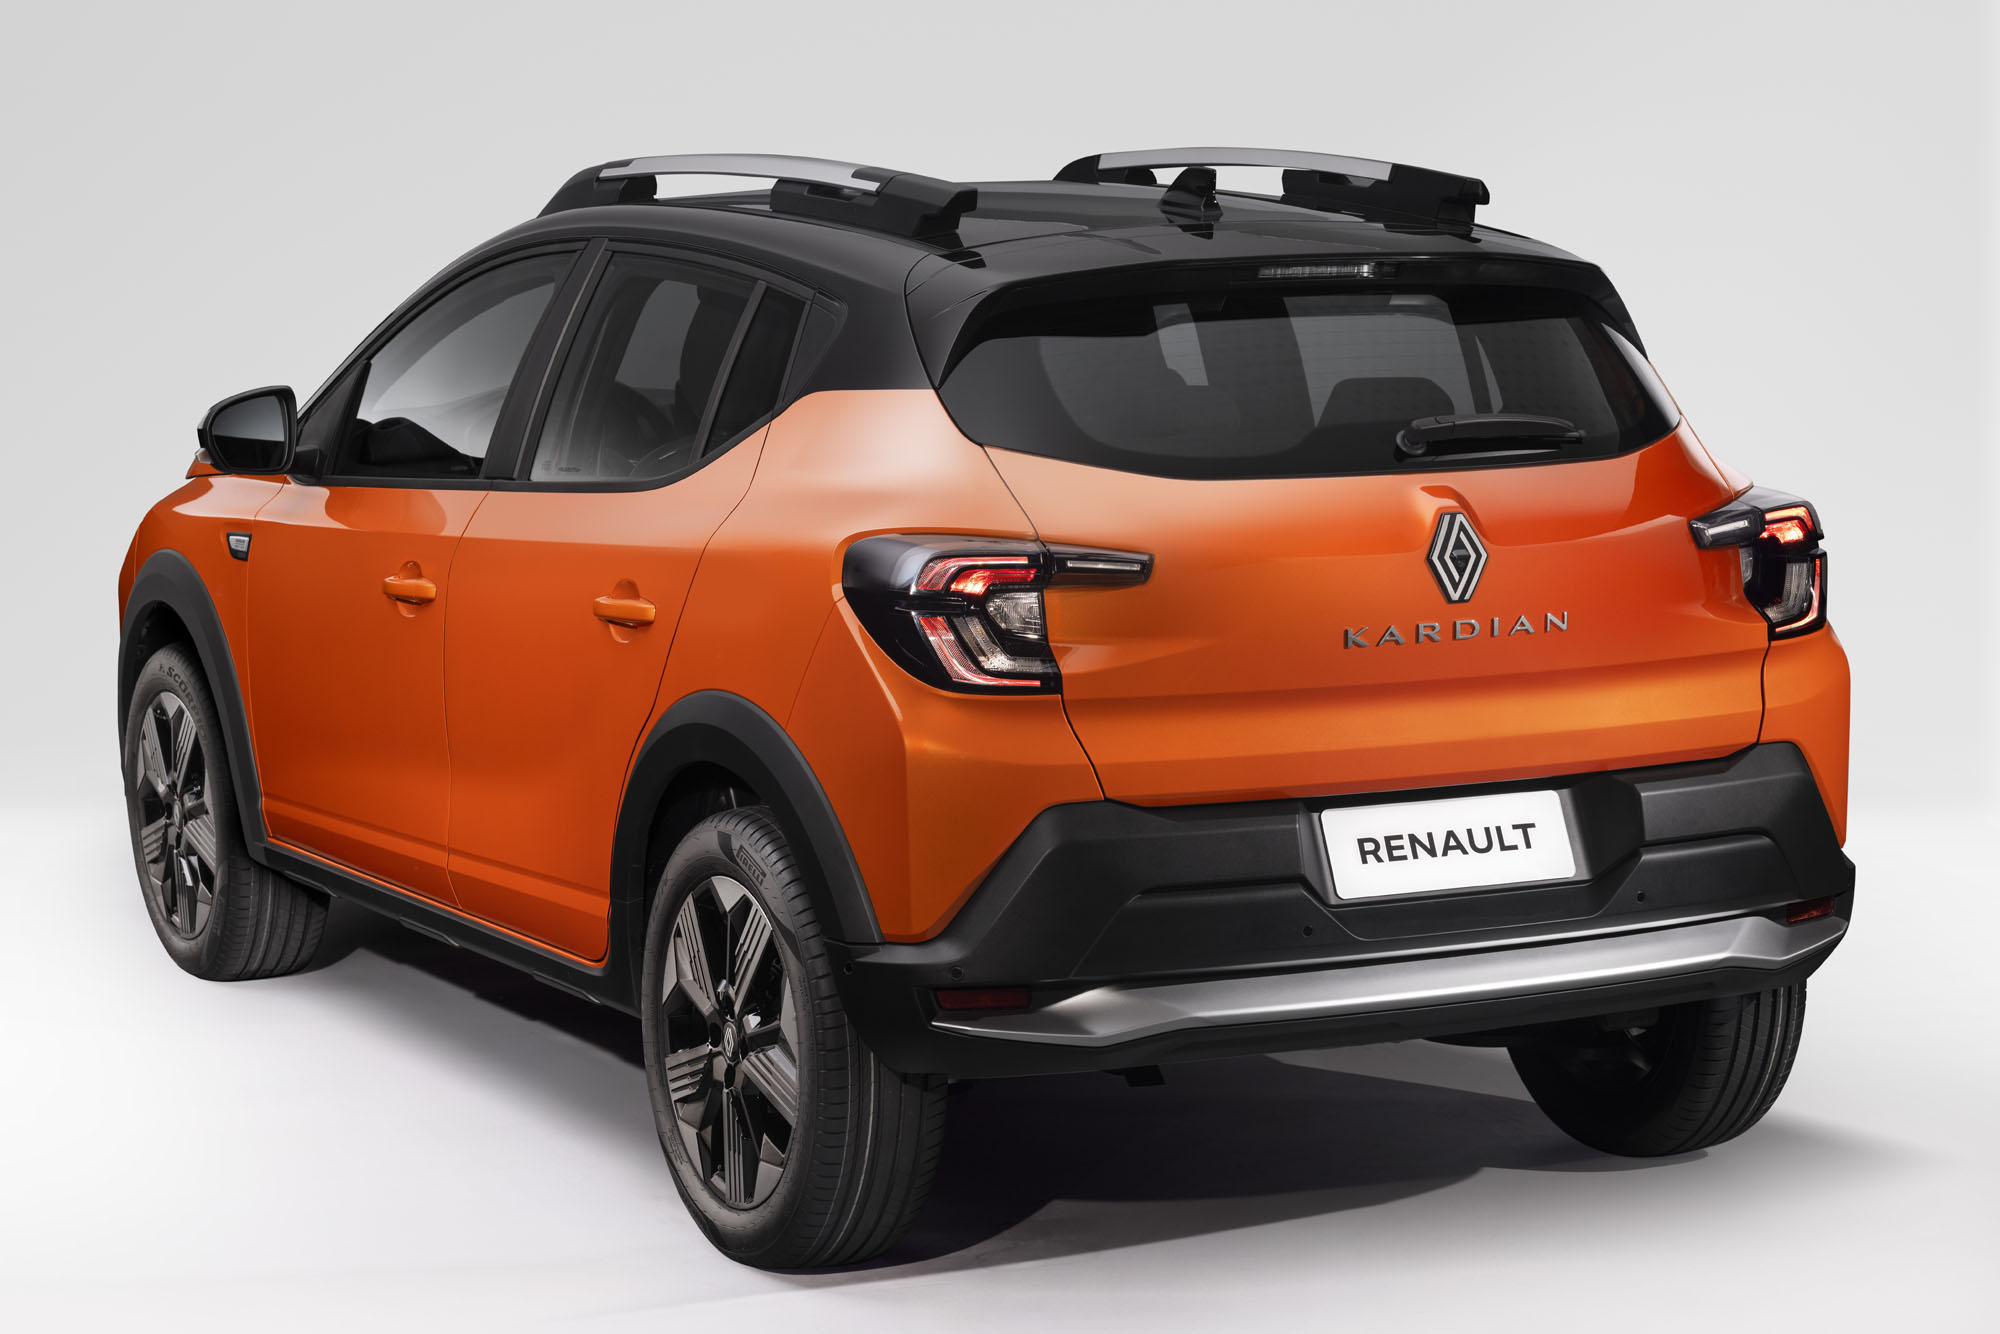 renault, renault kardian, new renault kardian unveiled – everything you need to know